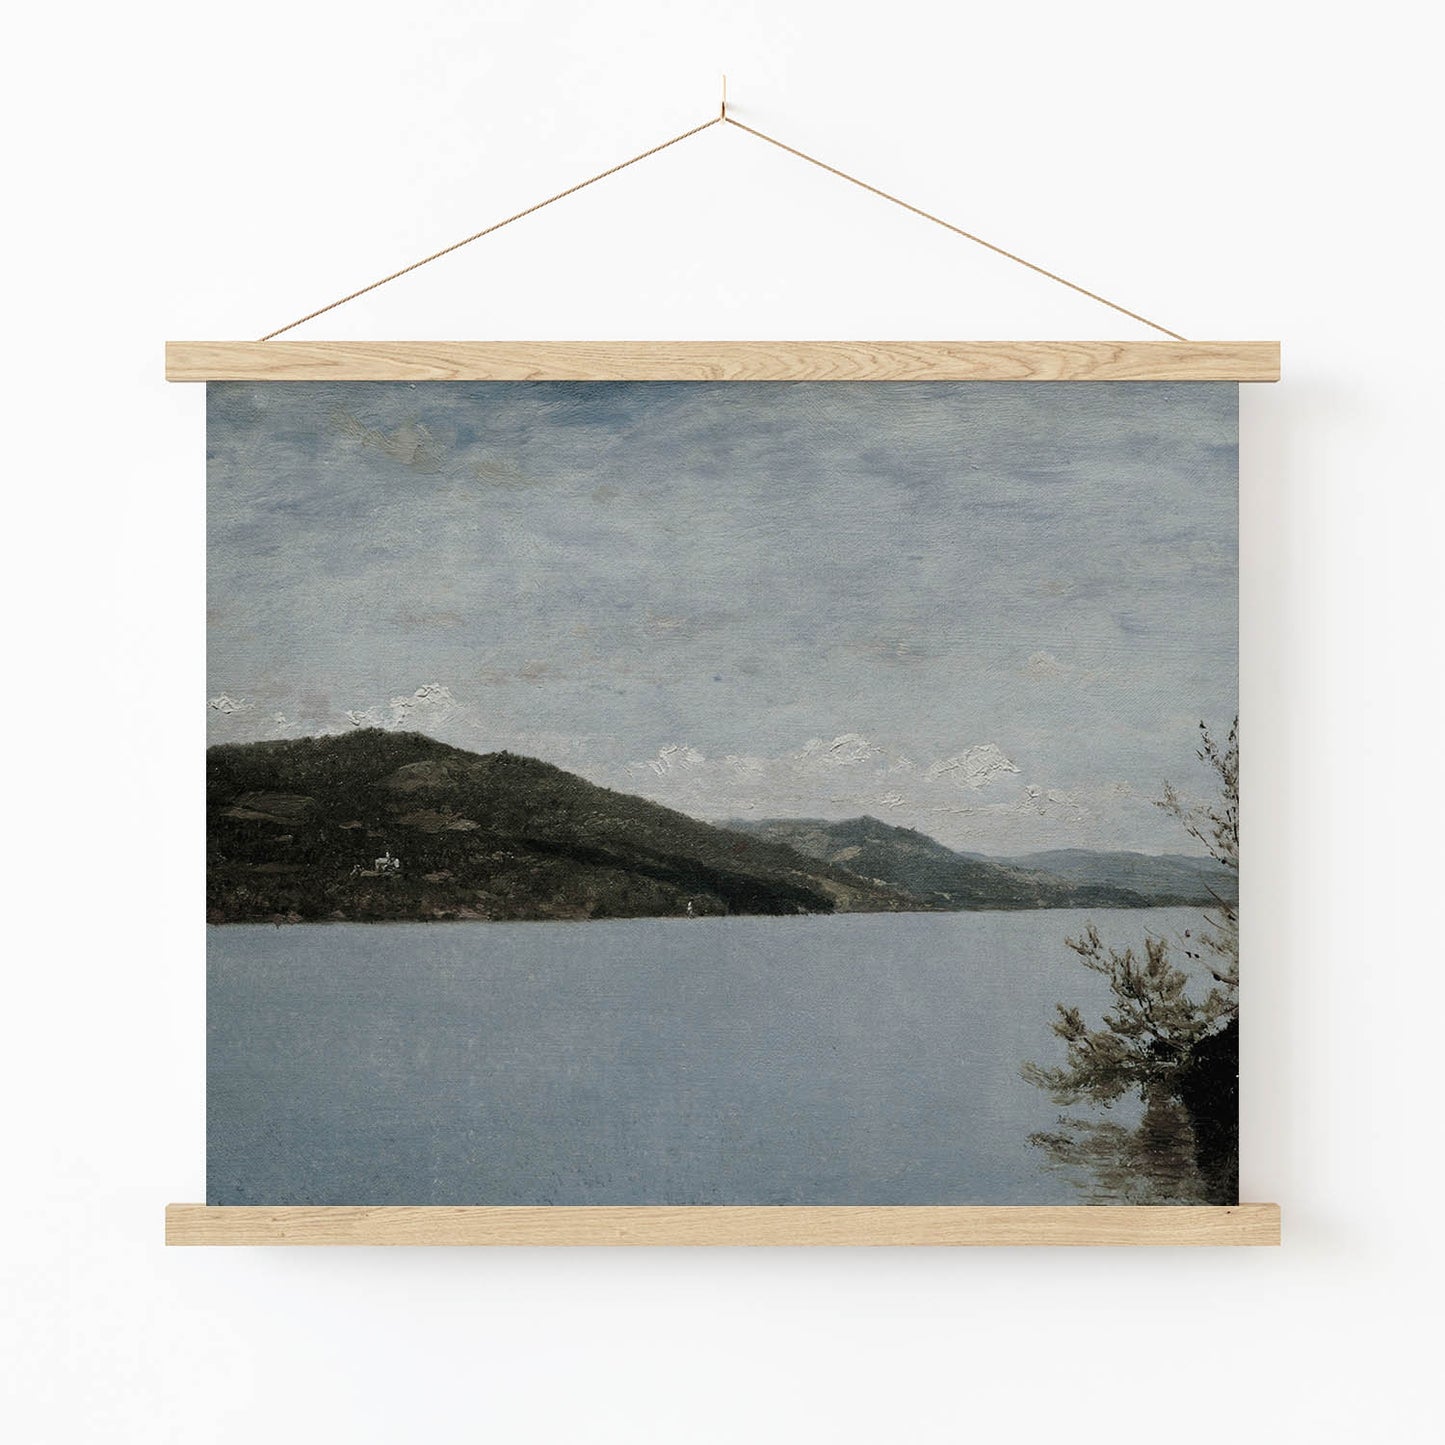 Blue and Green Nature Art Print in Wood Hanger Frame on Wall